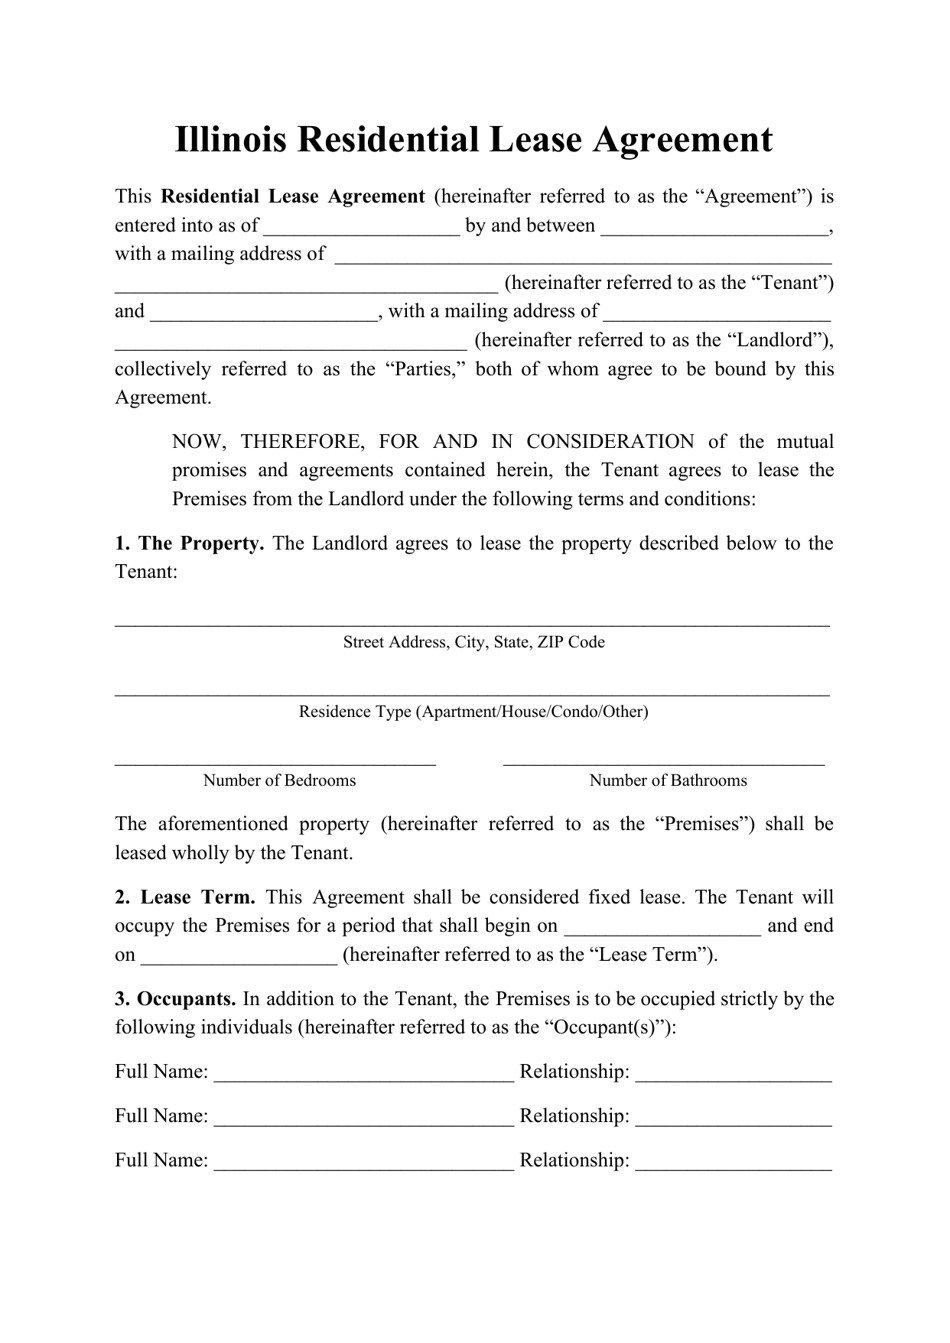 illinois residential lease agreement template download